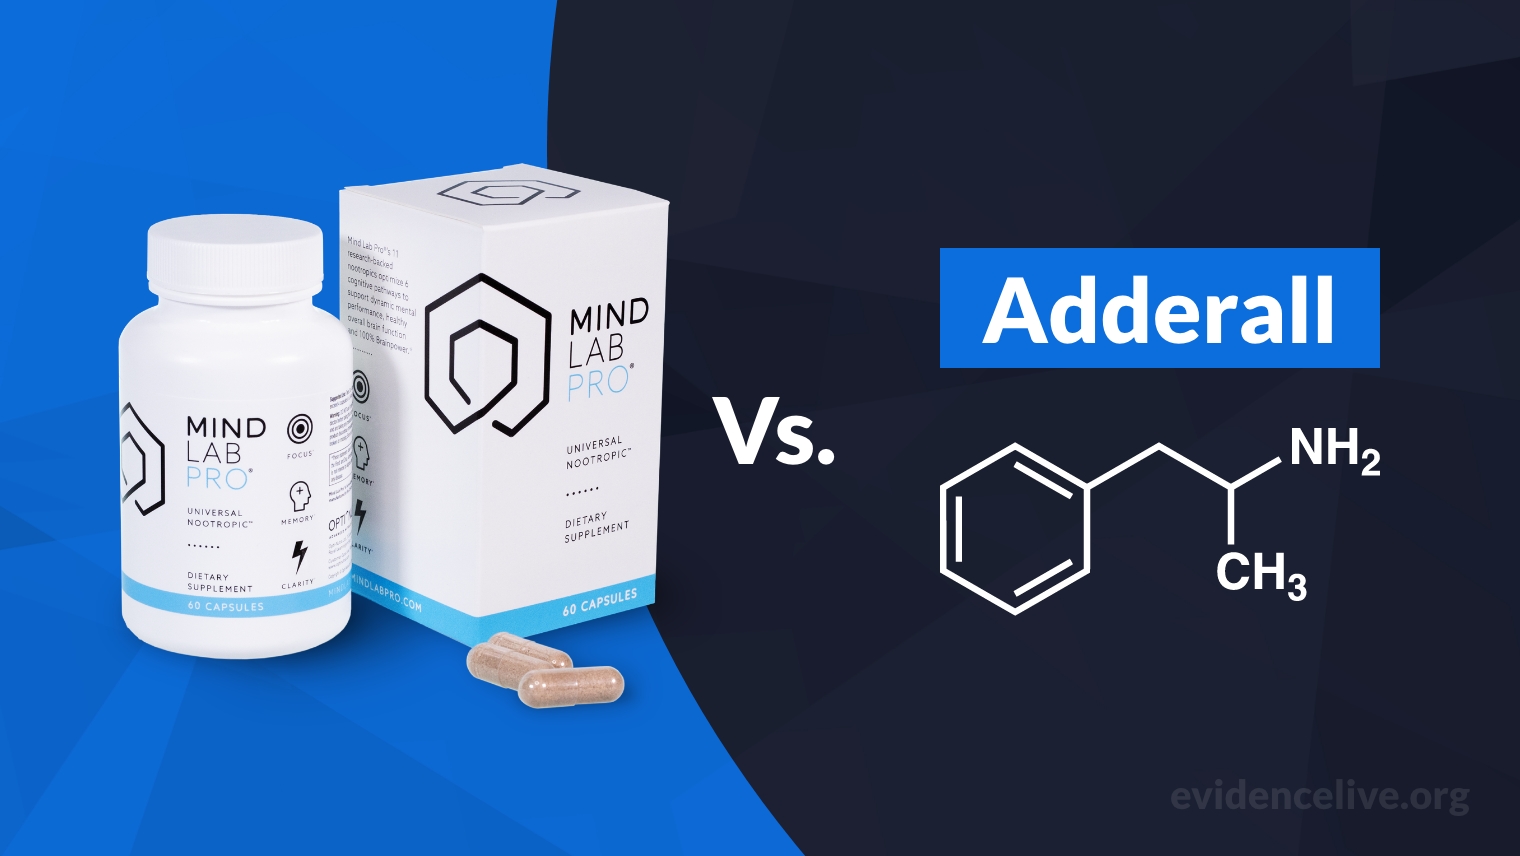 Mind Lab Pro vs. Adderall: Differences and What’s Better?